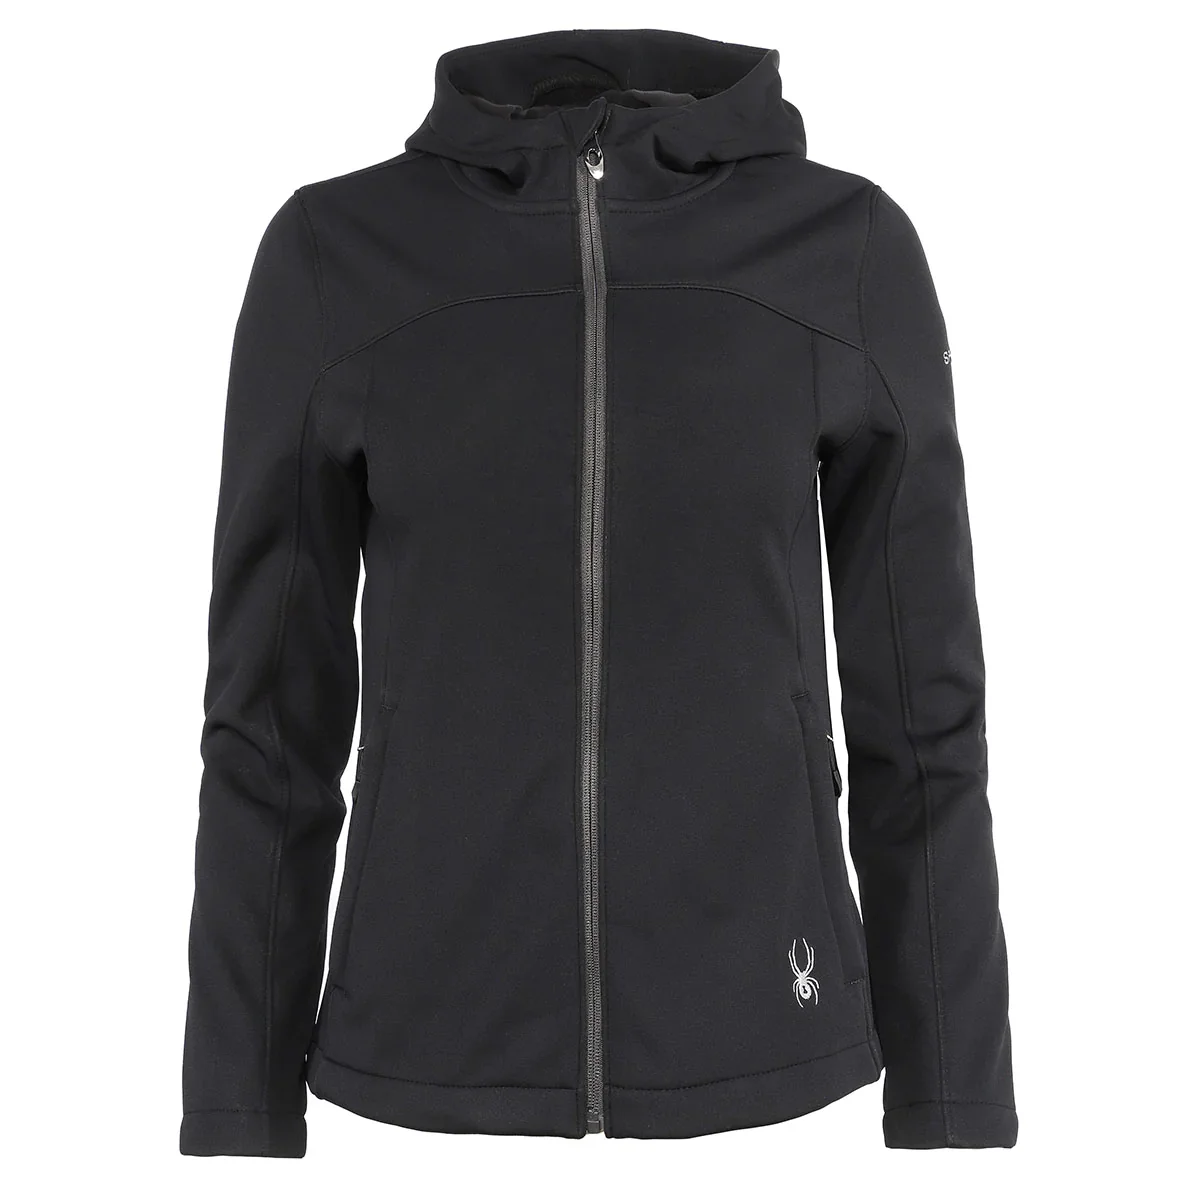 Image of Spyder Women's Alyce Softshell Jacket With Hood